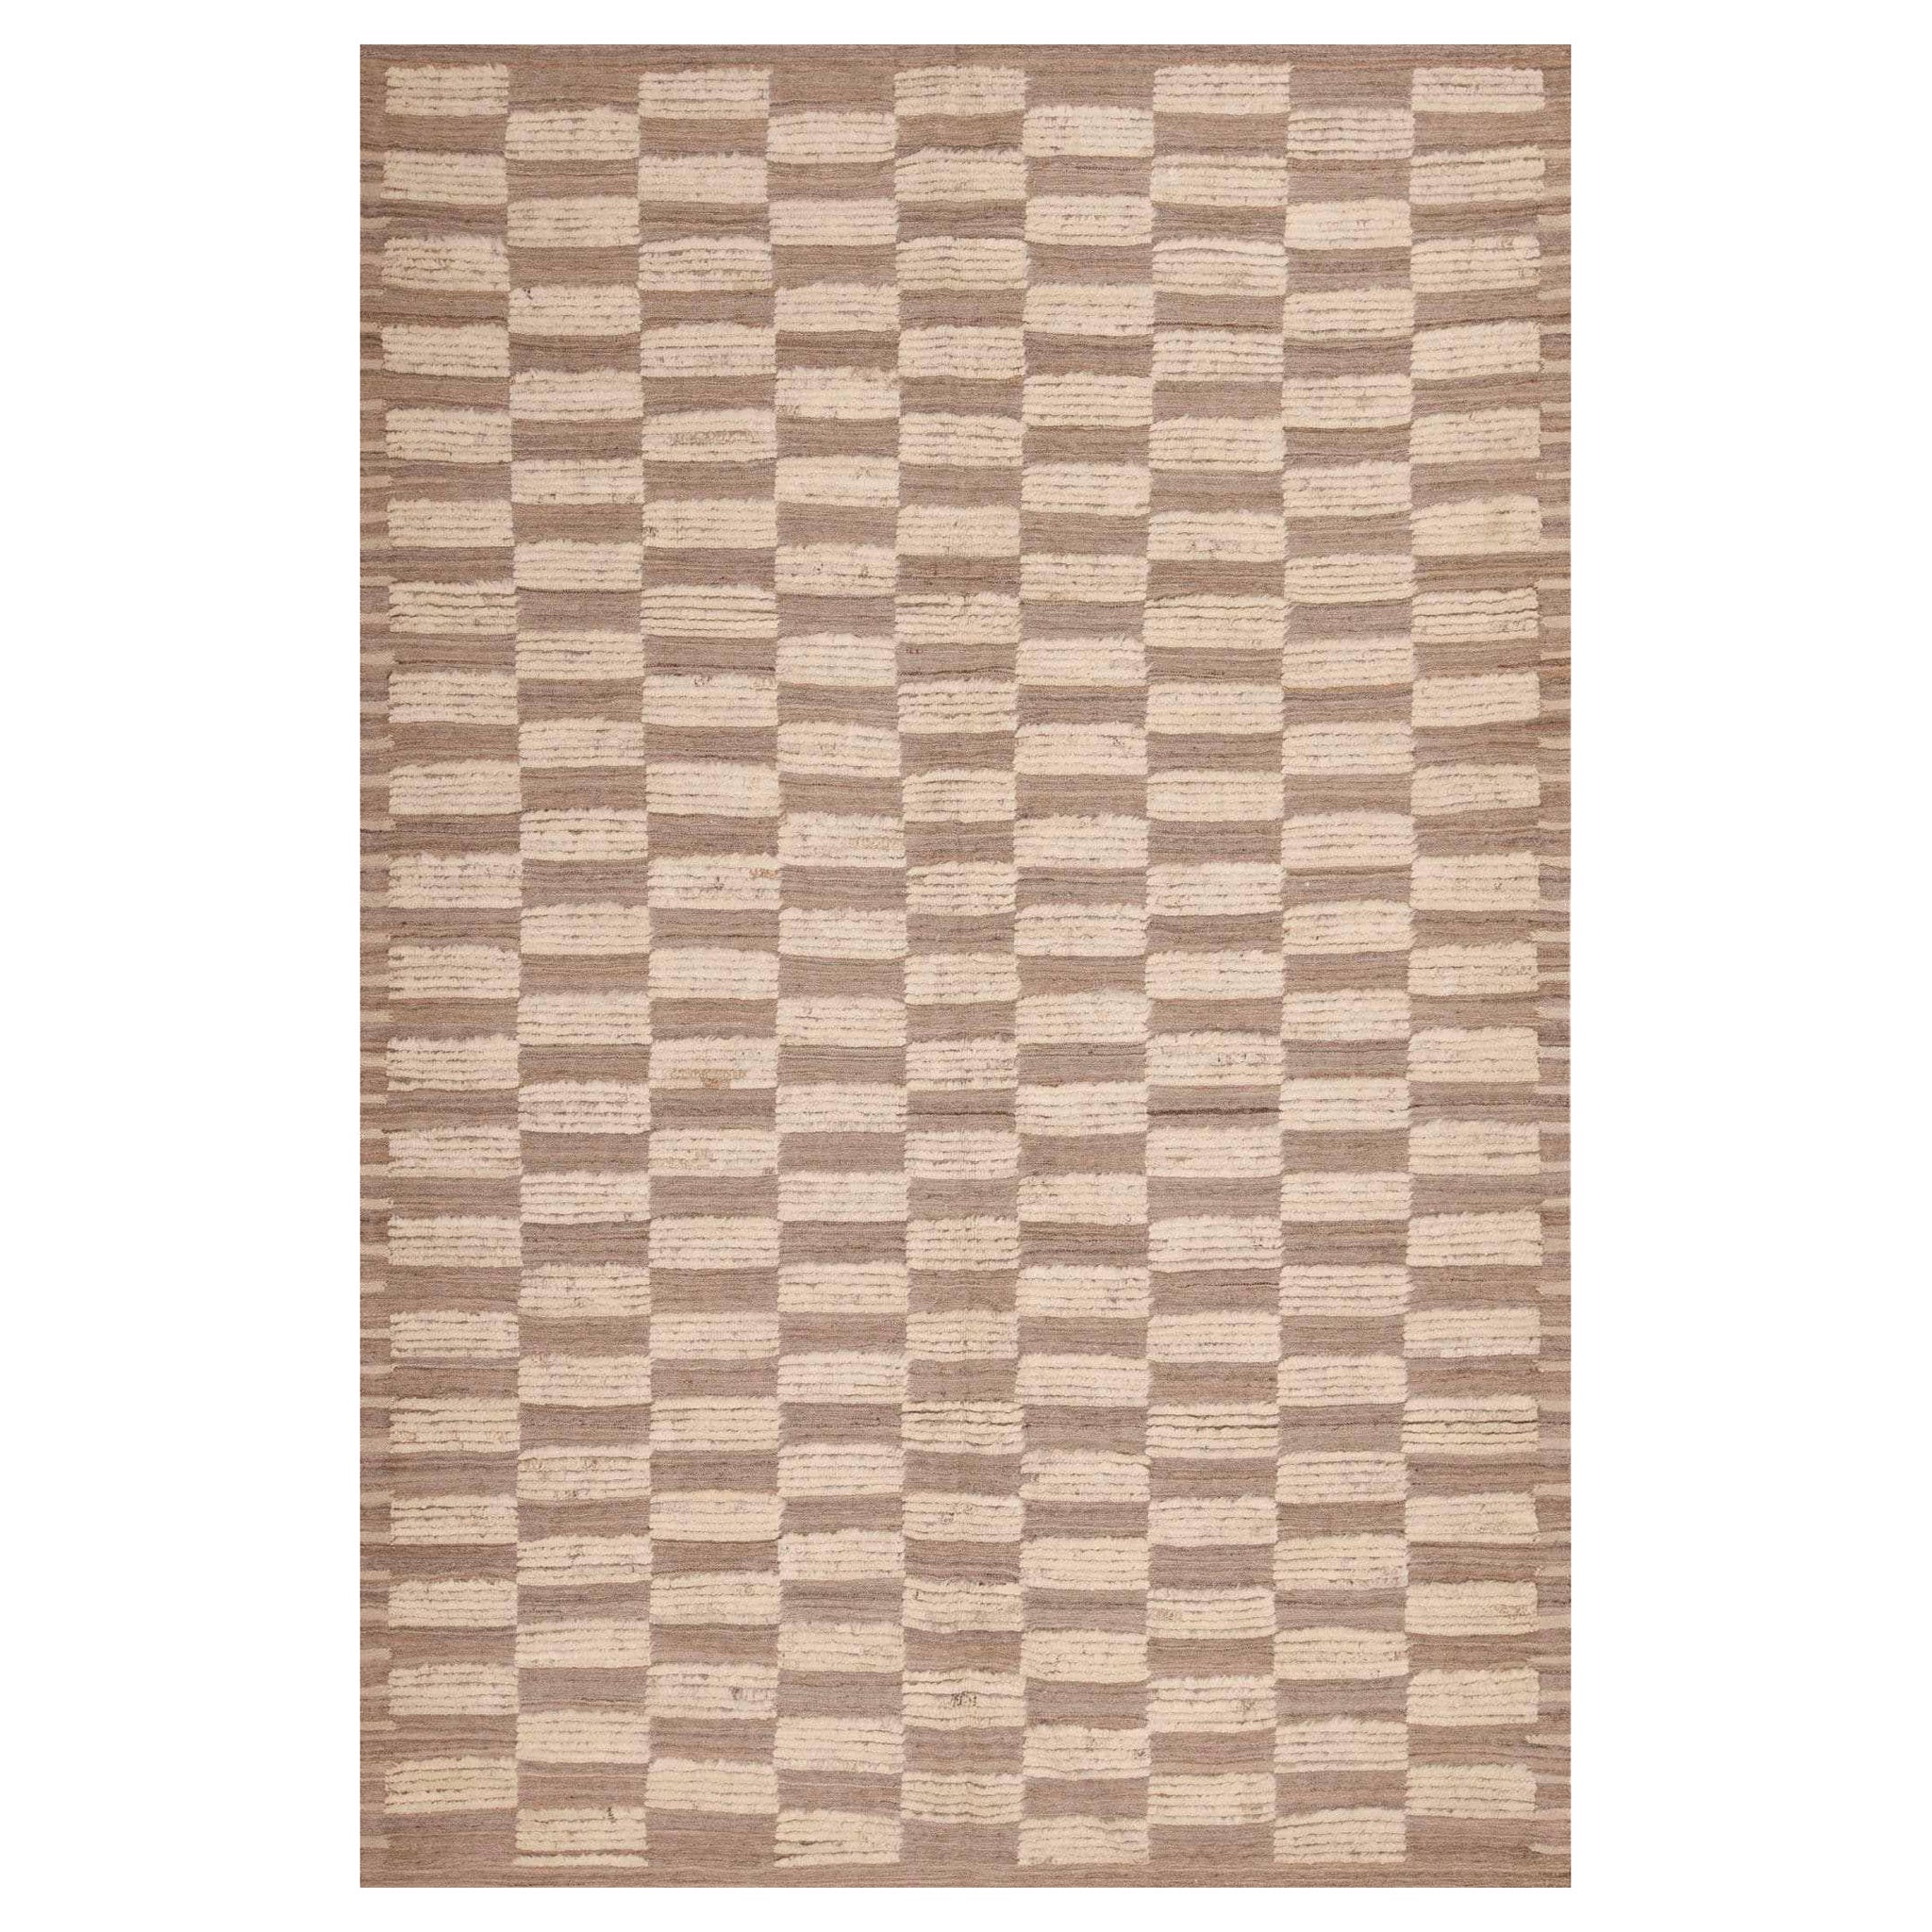 Nazmiyal Collection Modern Light Grey and Ivory Color Room Size Rug 6'6" x 9'6"